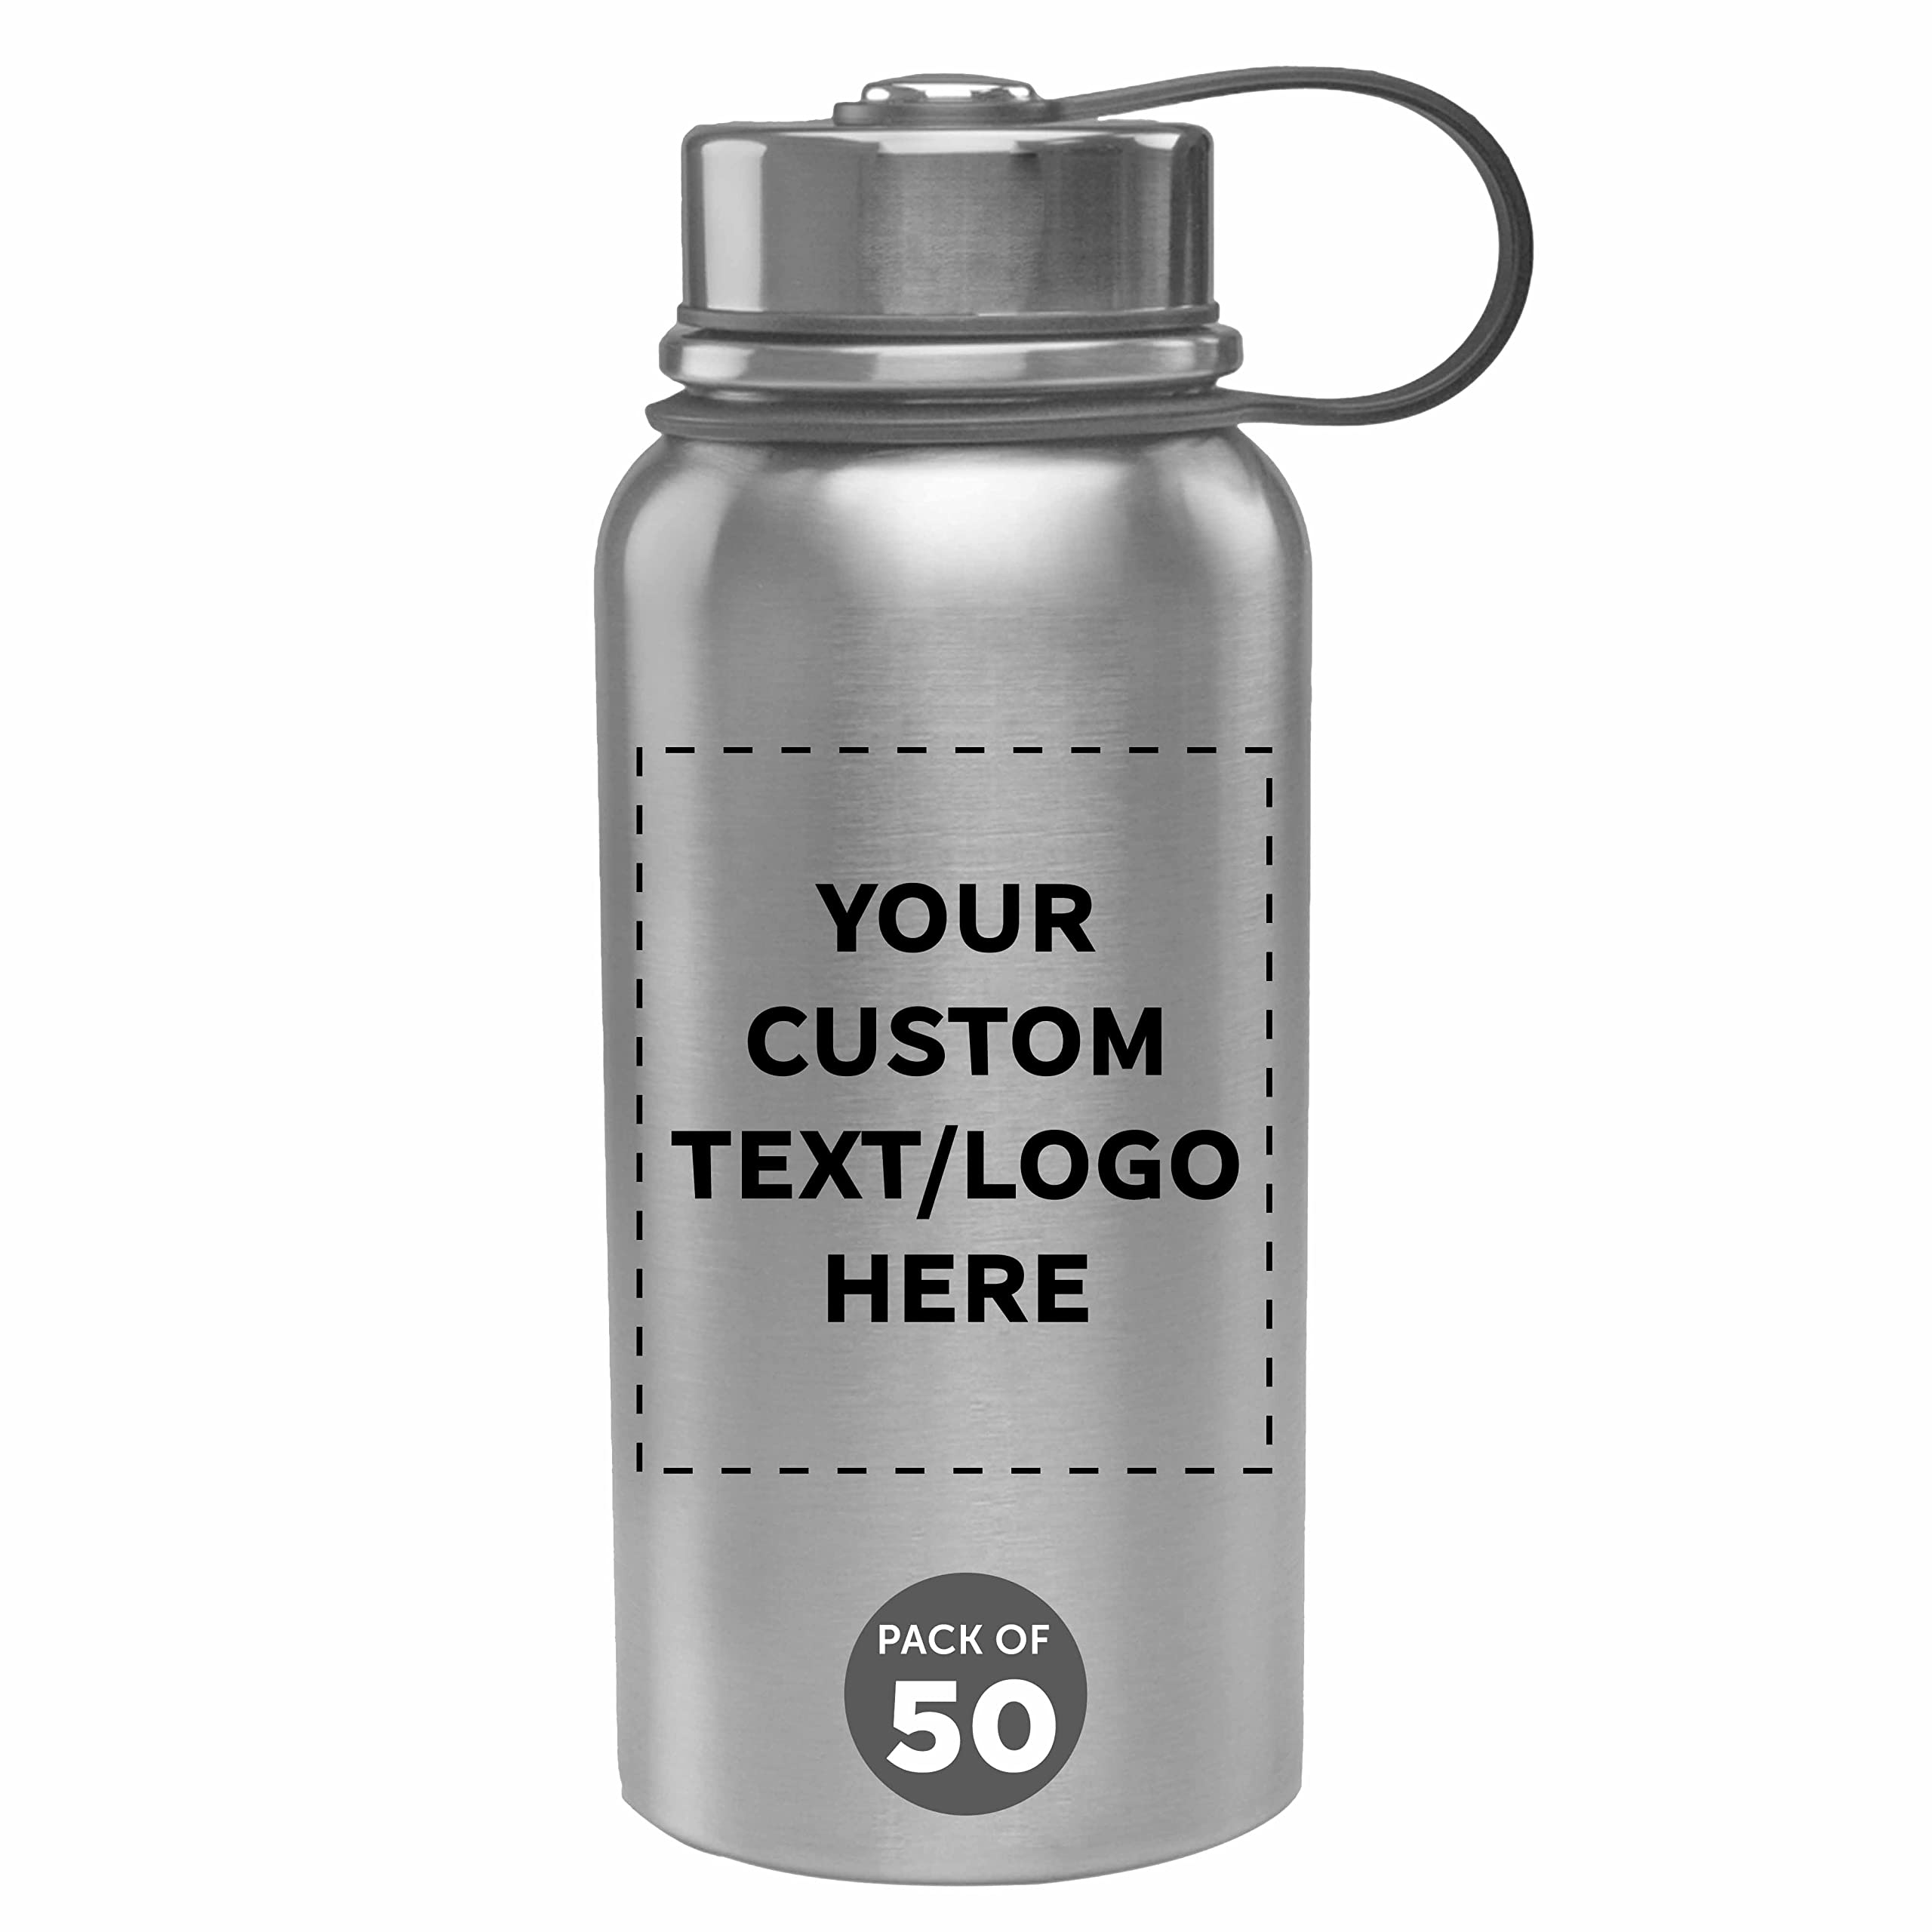 DISCOUNT PROMOS Custom Vacuum Stainless Steel Water Bottles 27 oz. Set of 50 Personalized Bulk Pack - Reusable Great for Gy